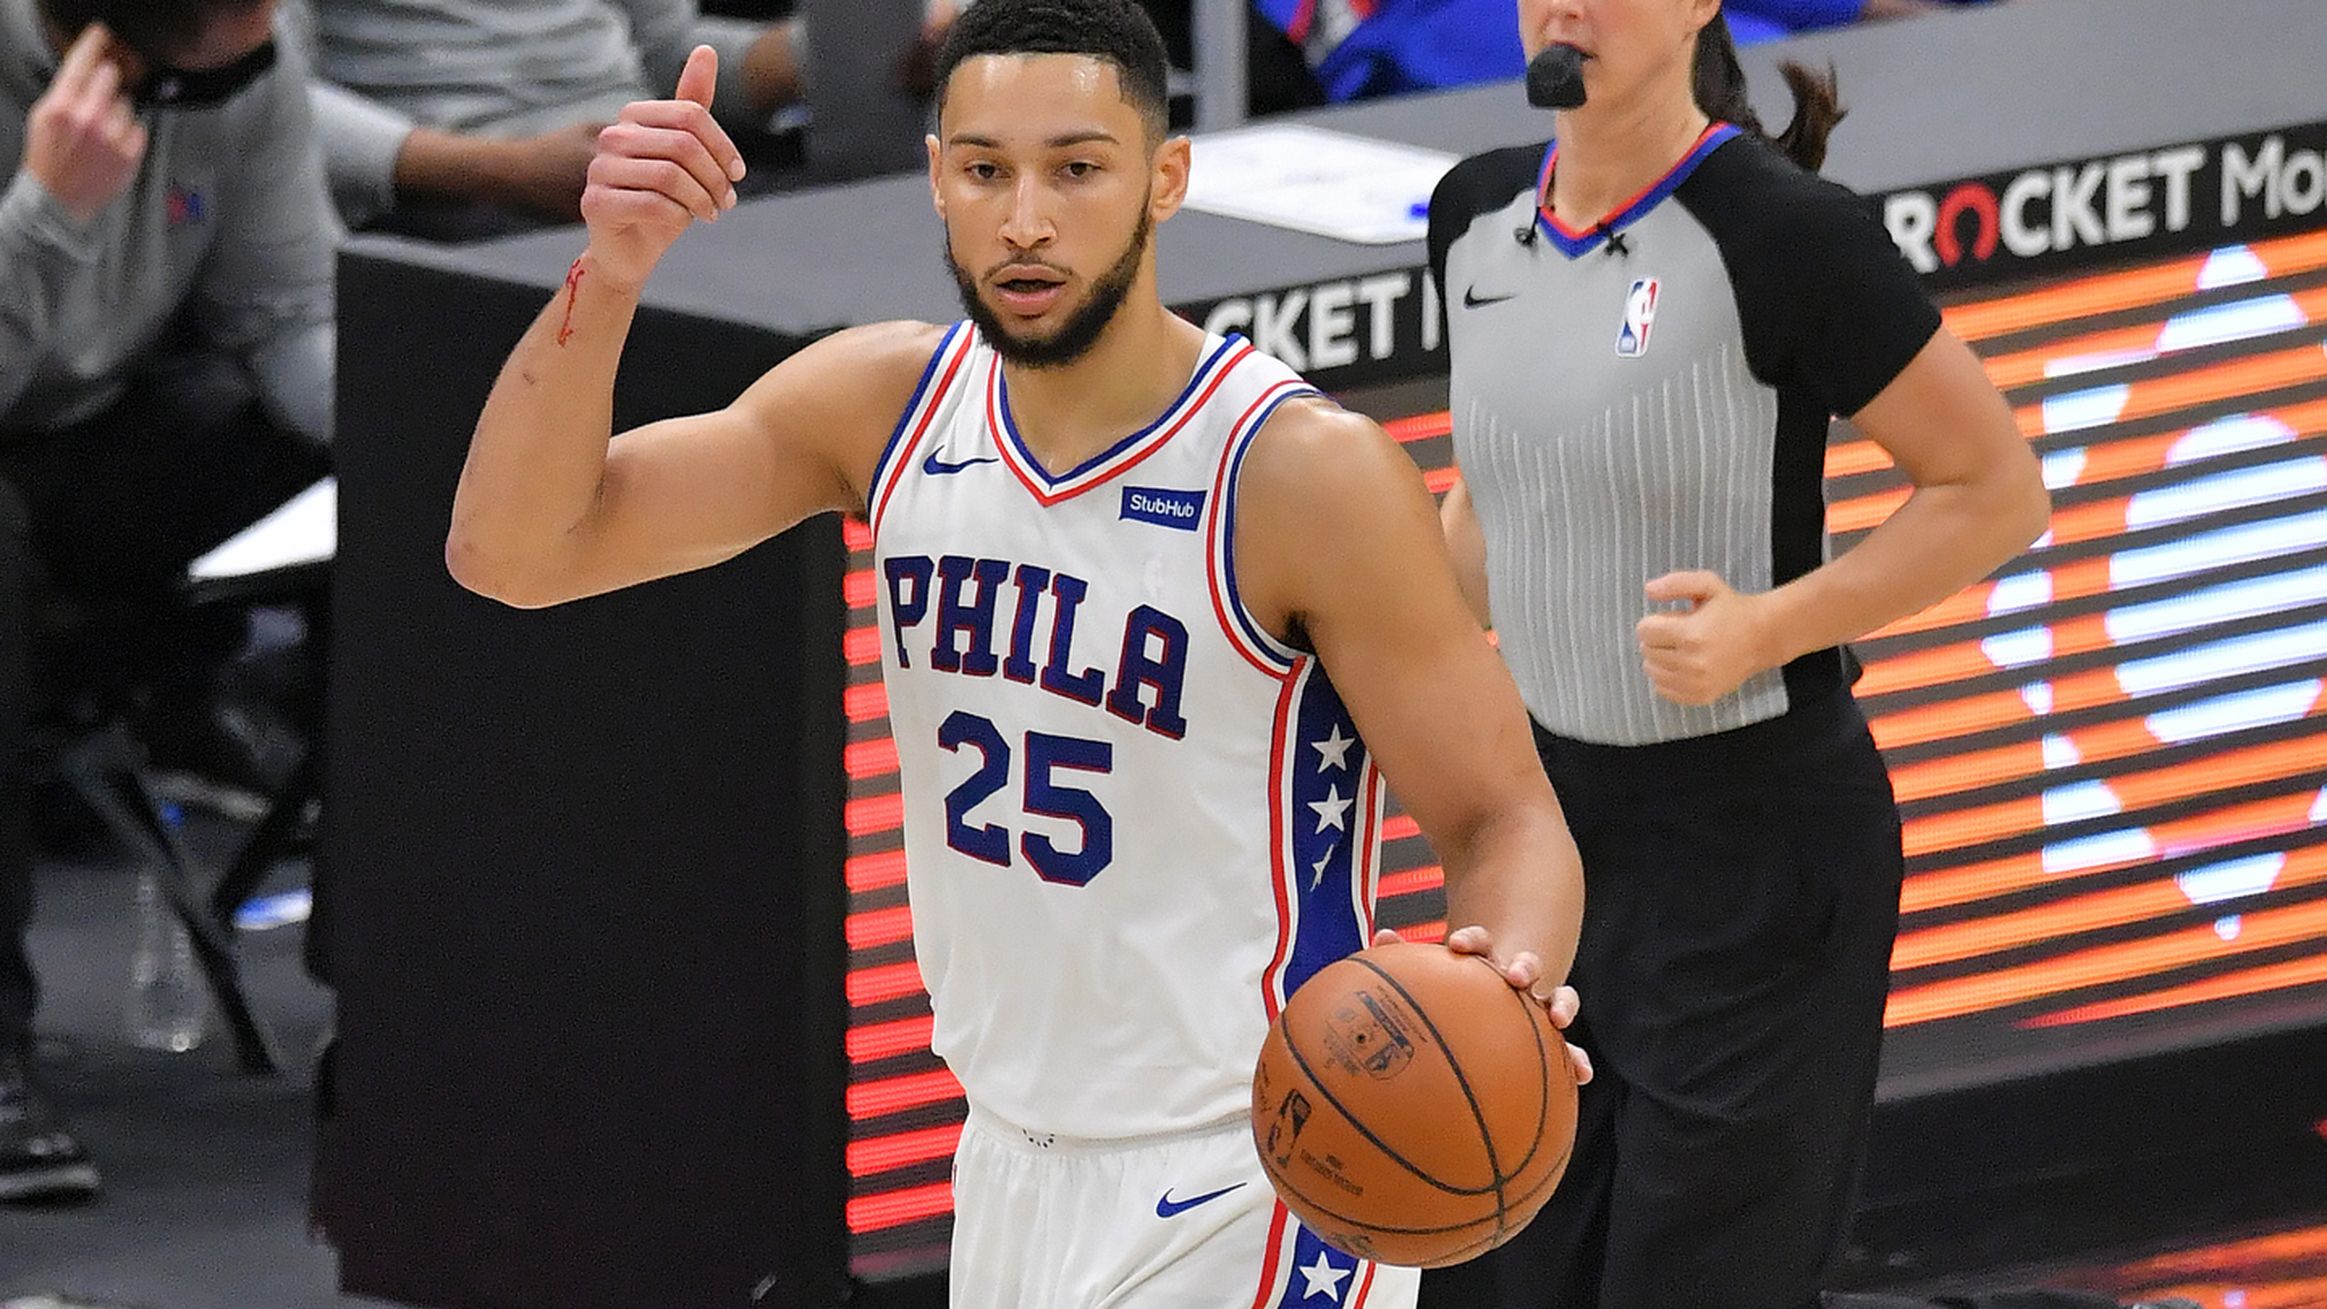 Ben Simmons hits the third three pointer of his NBA career in Philadelphia 76ers rout of Orlando Magic